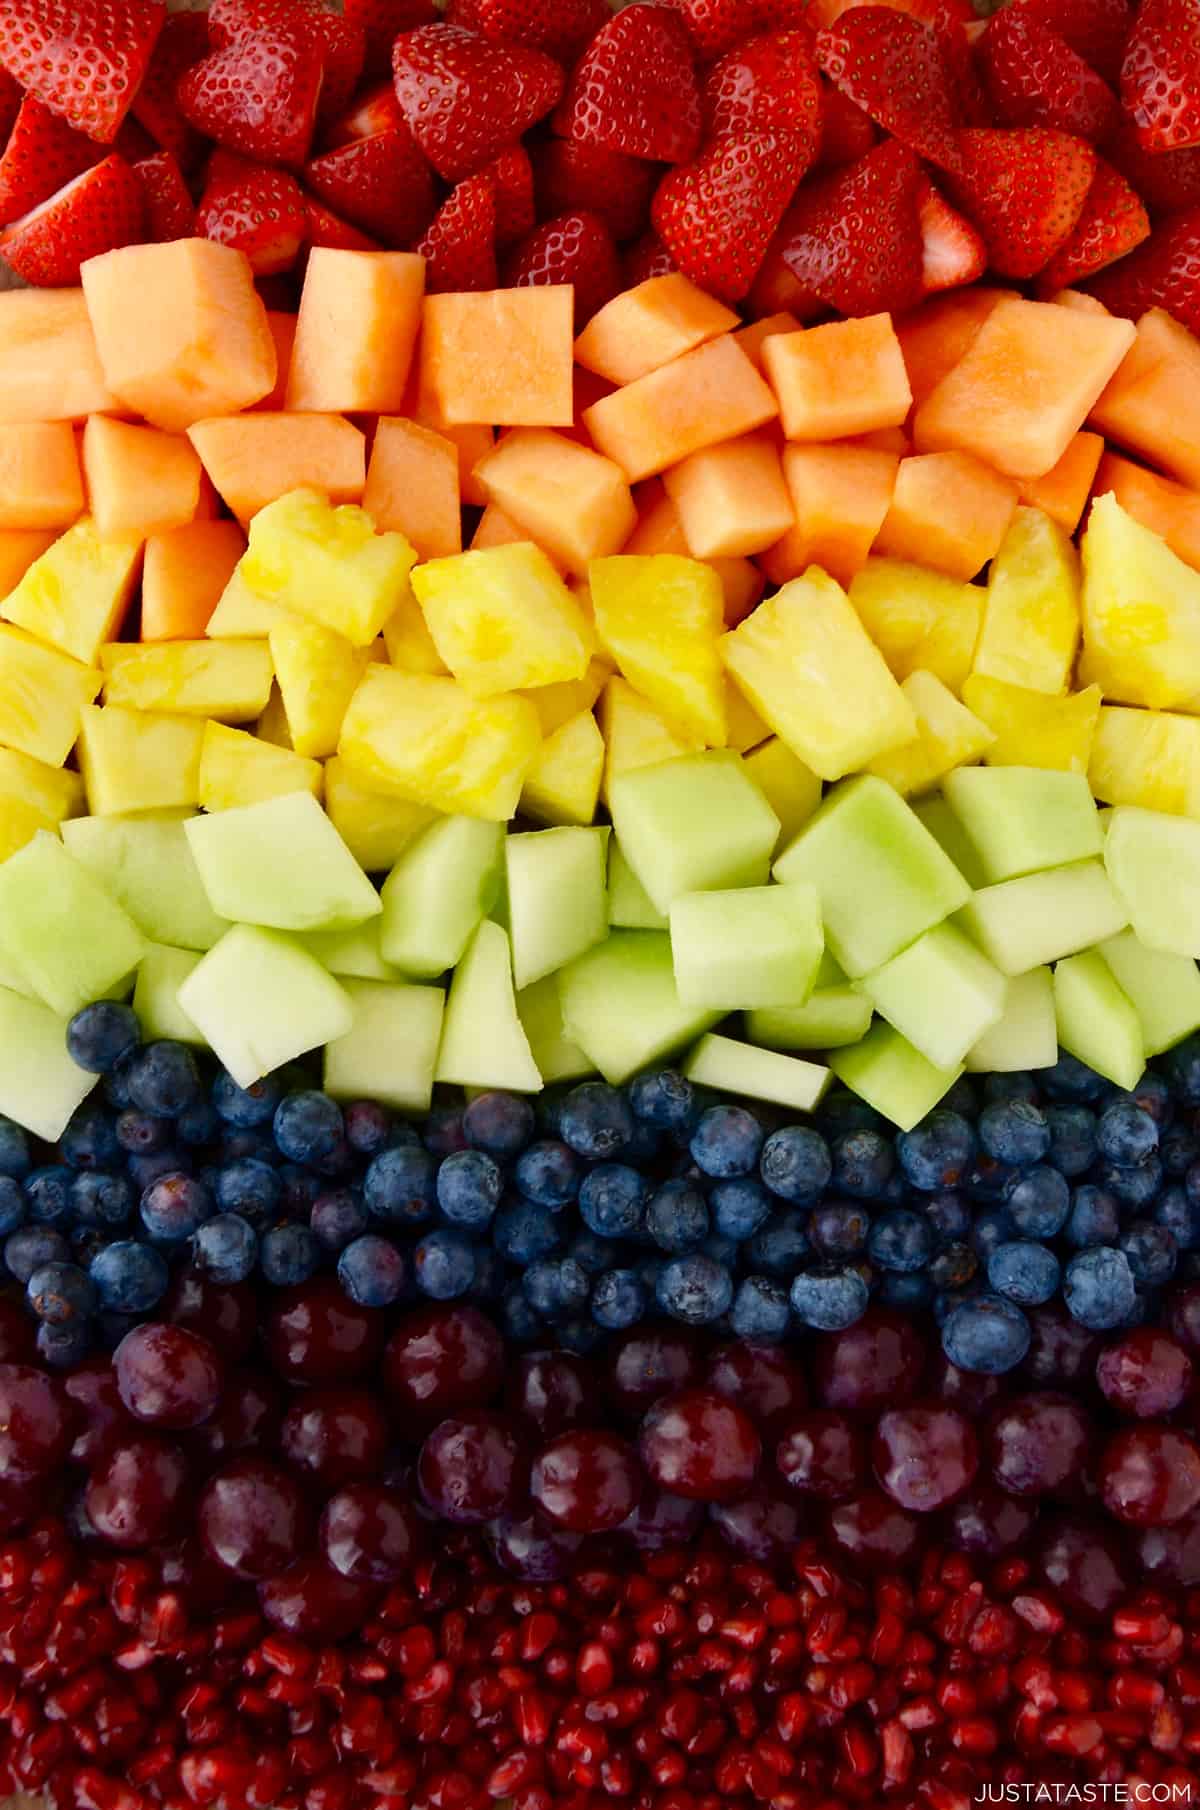 A rainbow of fresh fruit, including sliced strawberries, sliced cantaloupe, sliced pineapple, sliced honeydew melon, blueberries, purple grapes and pomegranate arils.